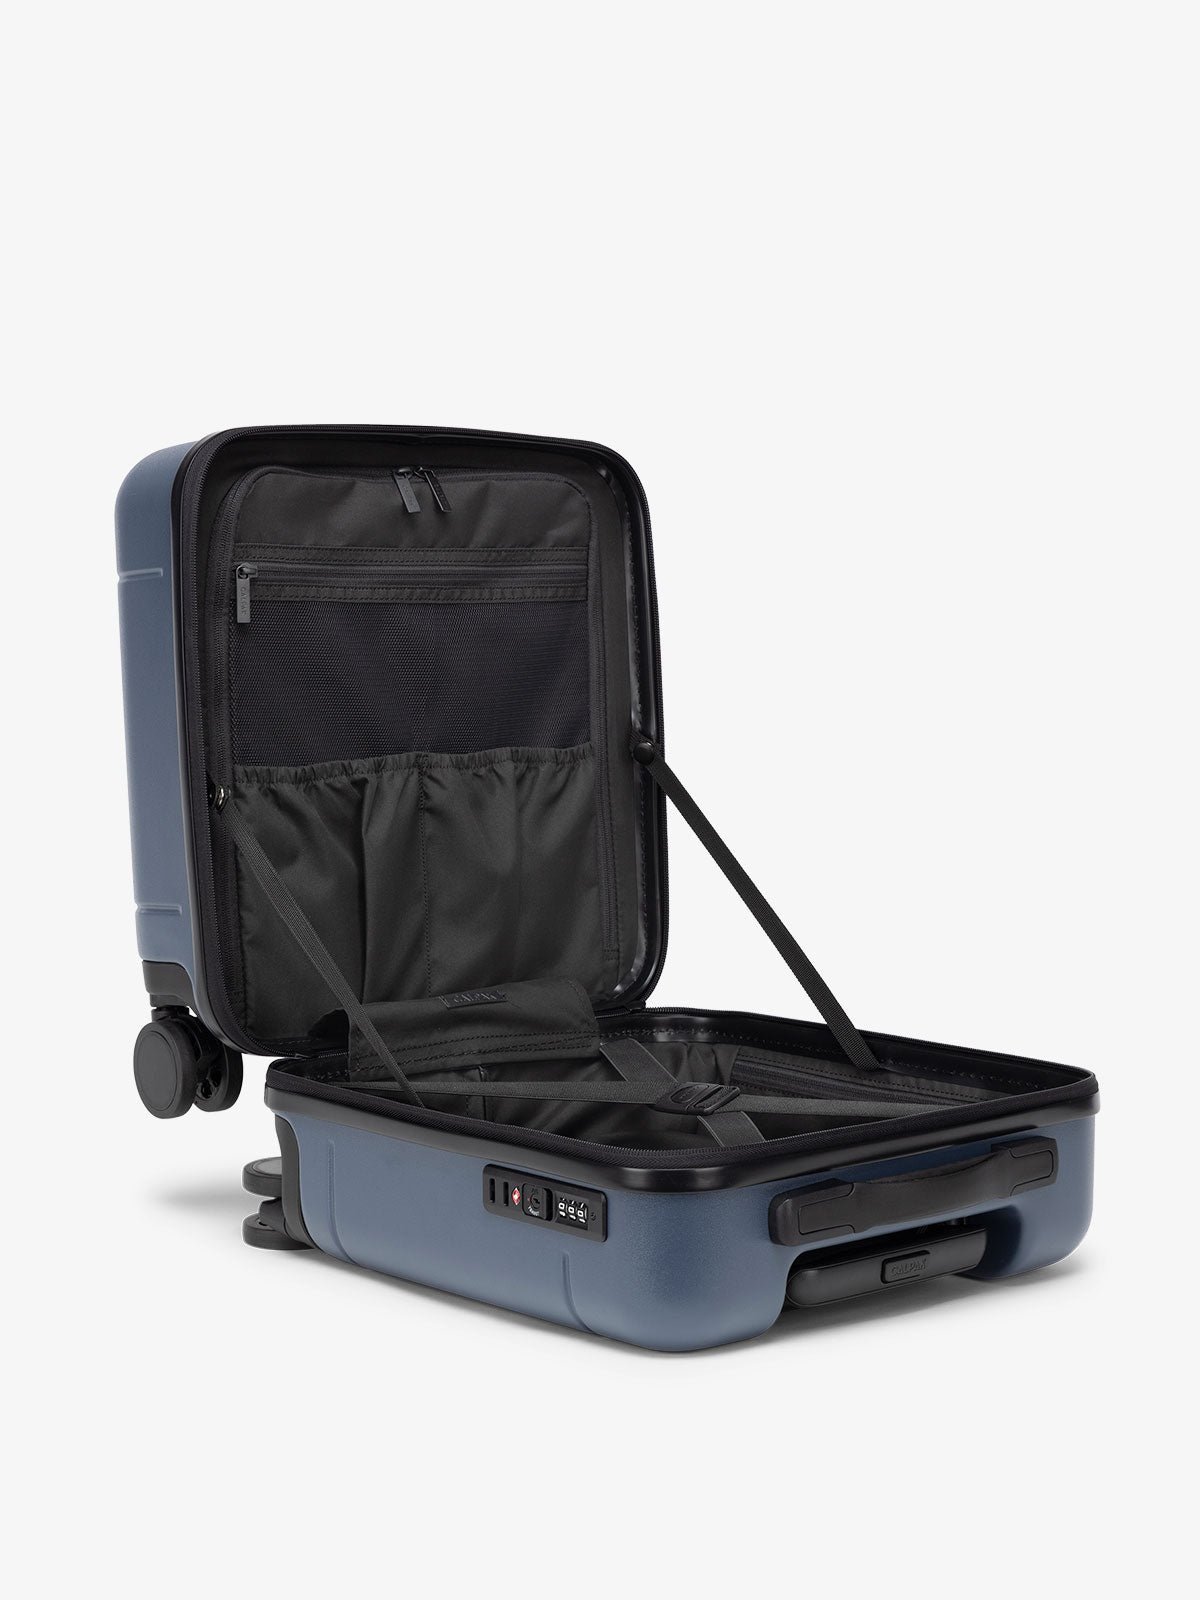 Hue mini luggage bag with compression straps and compartments